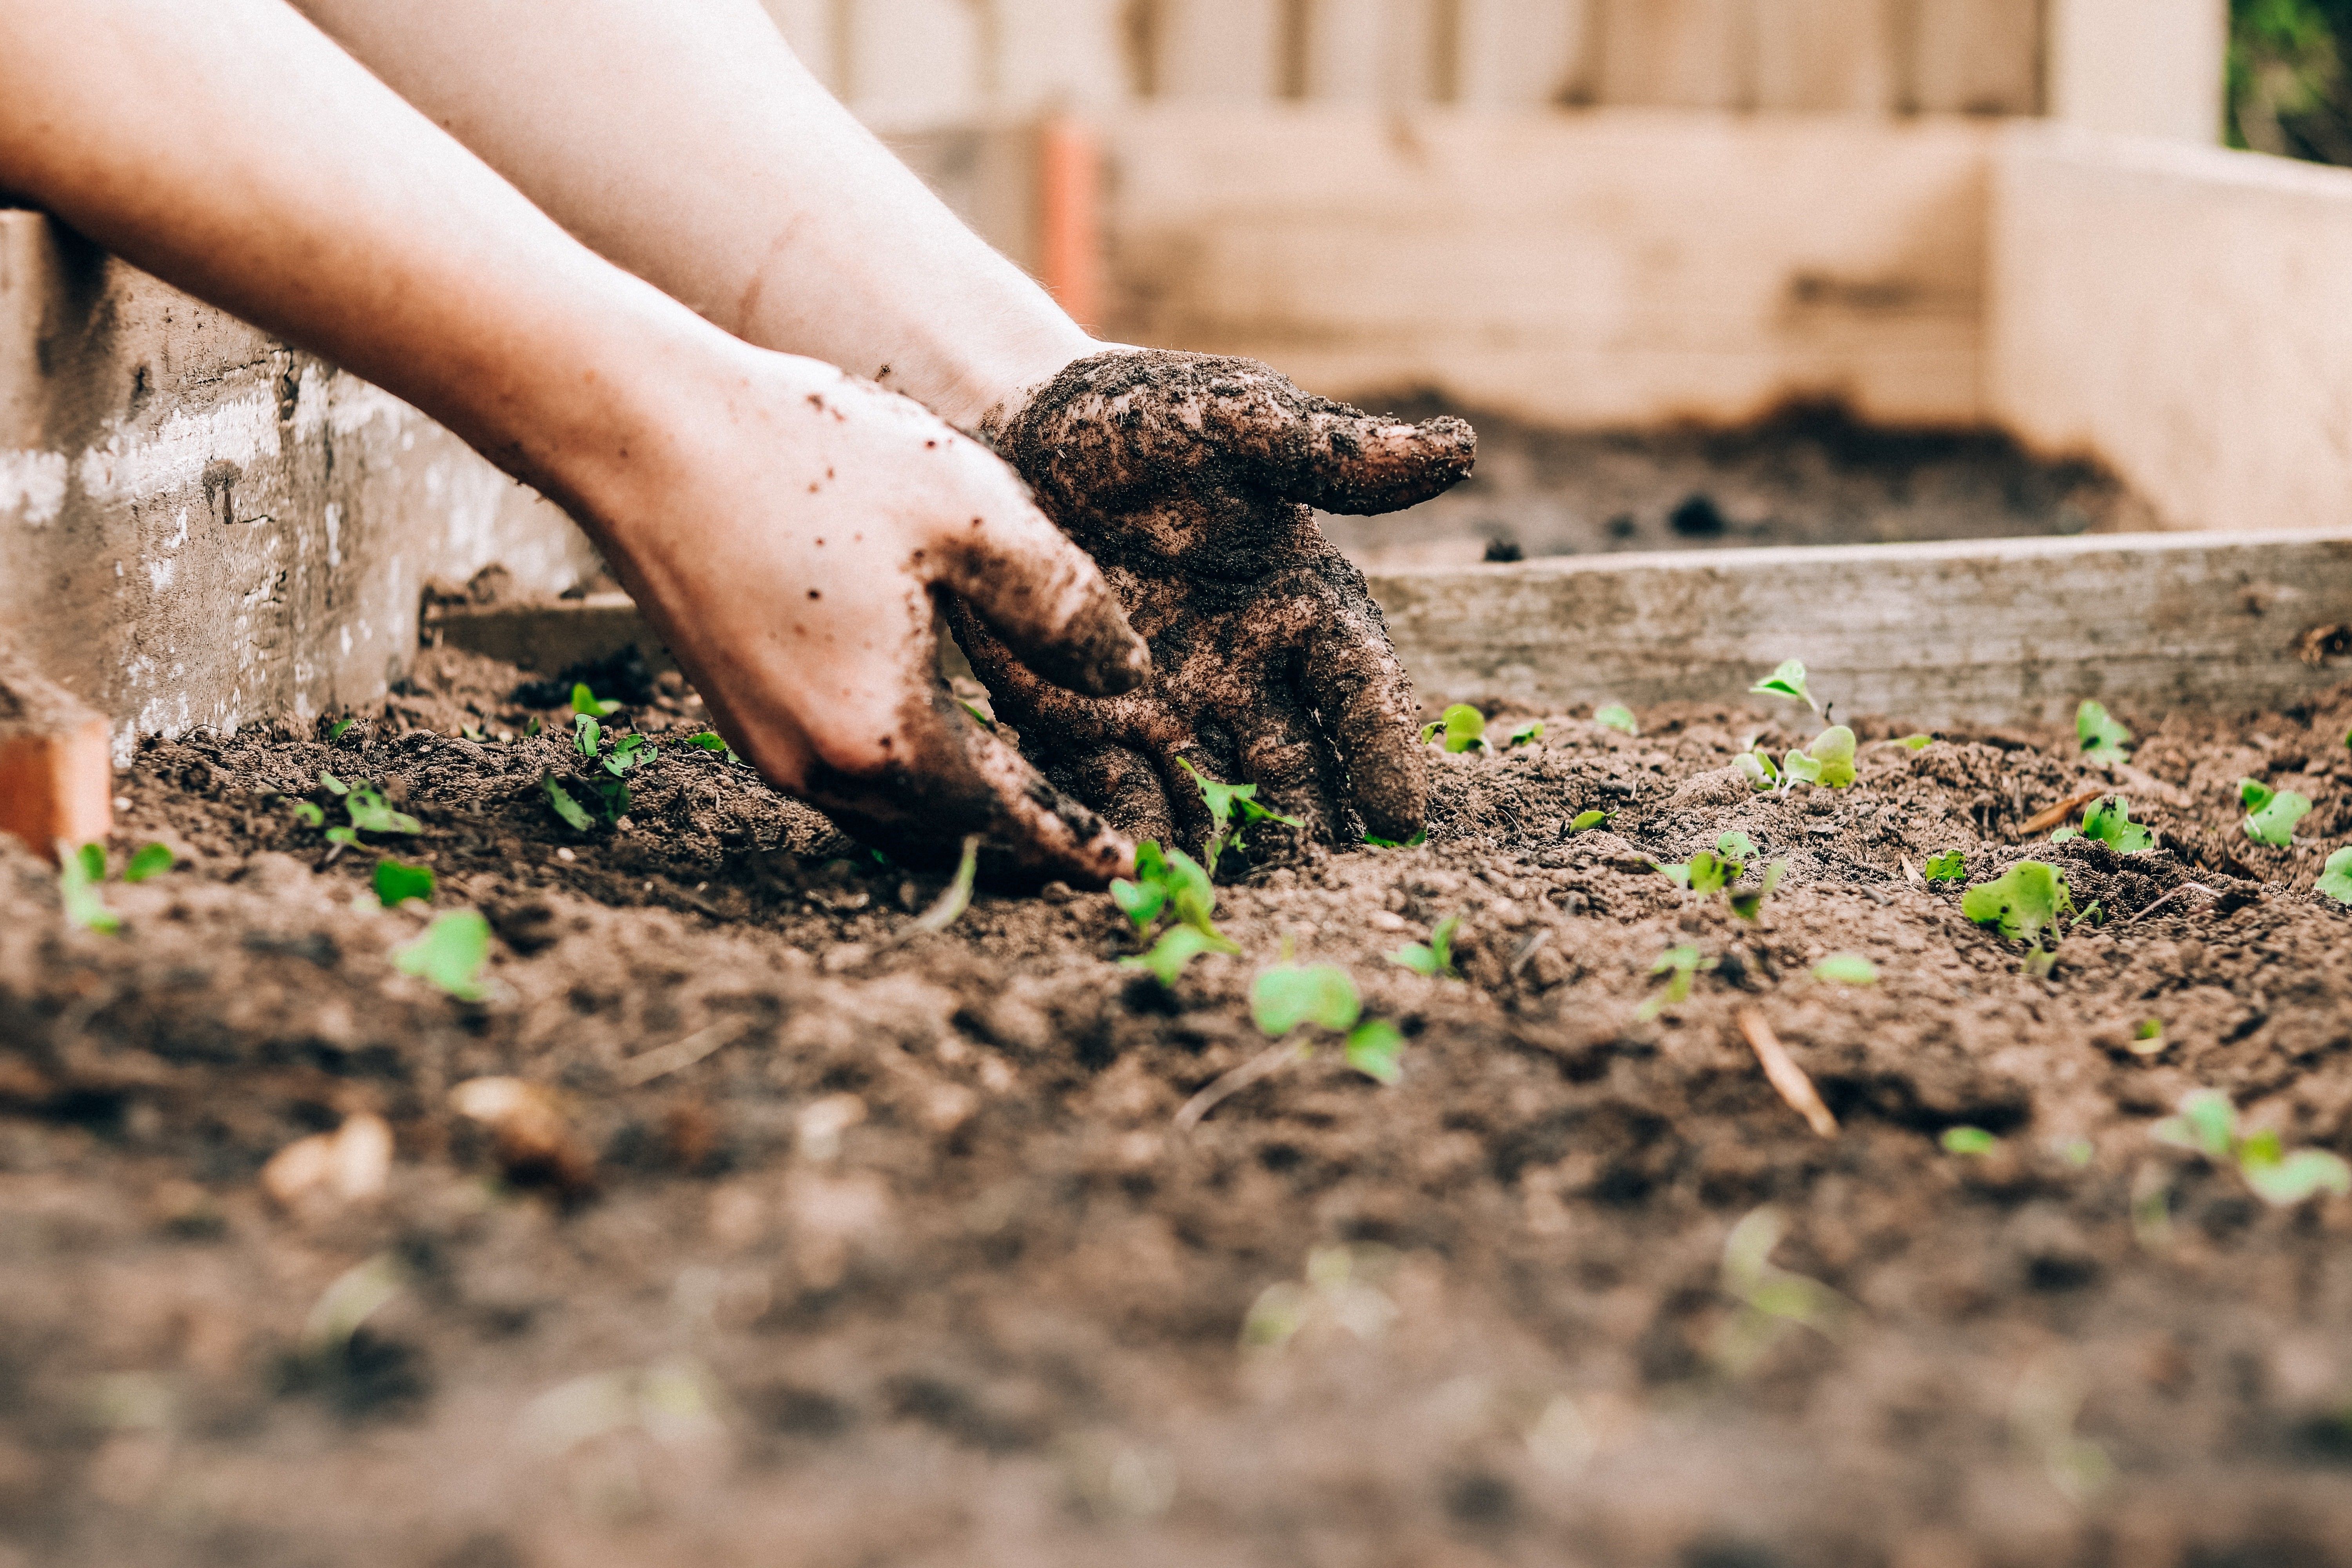 Reap the Benefits of Joining a Community Garden